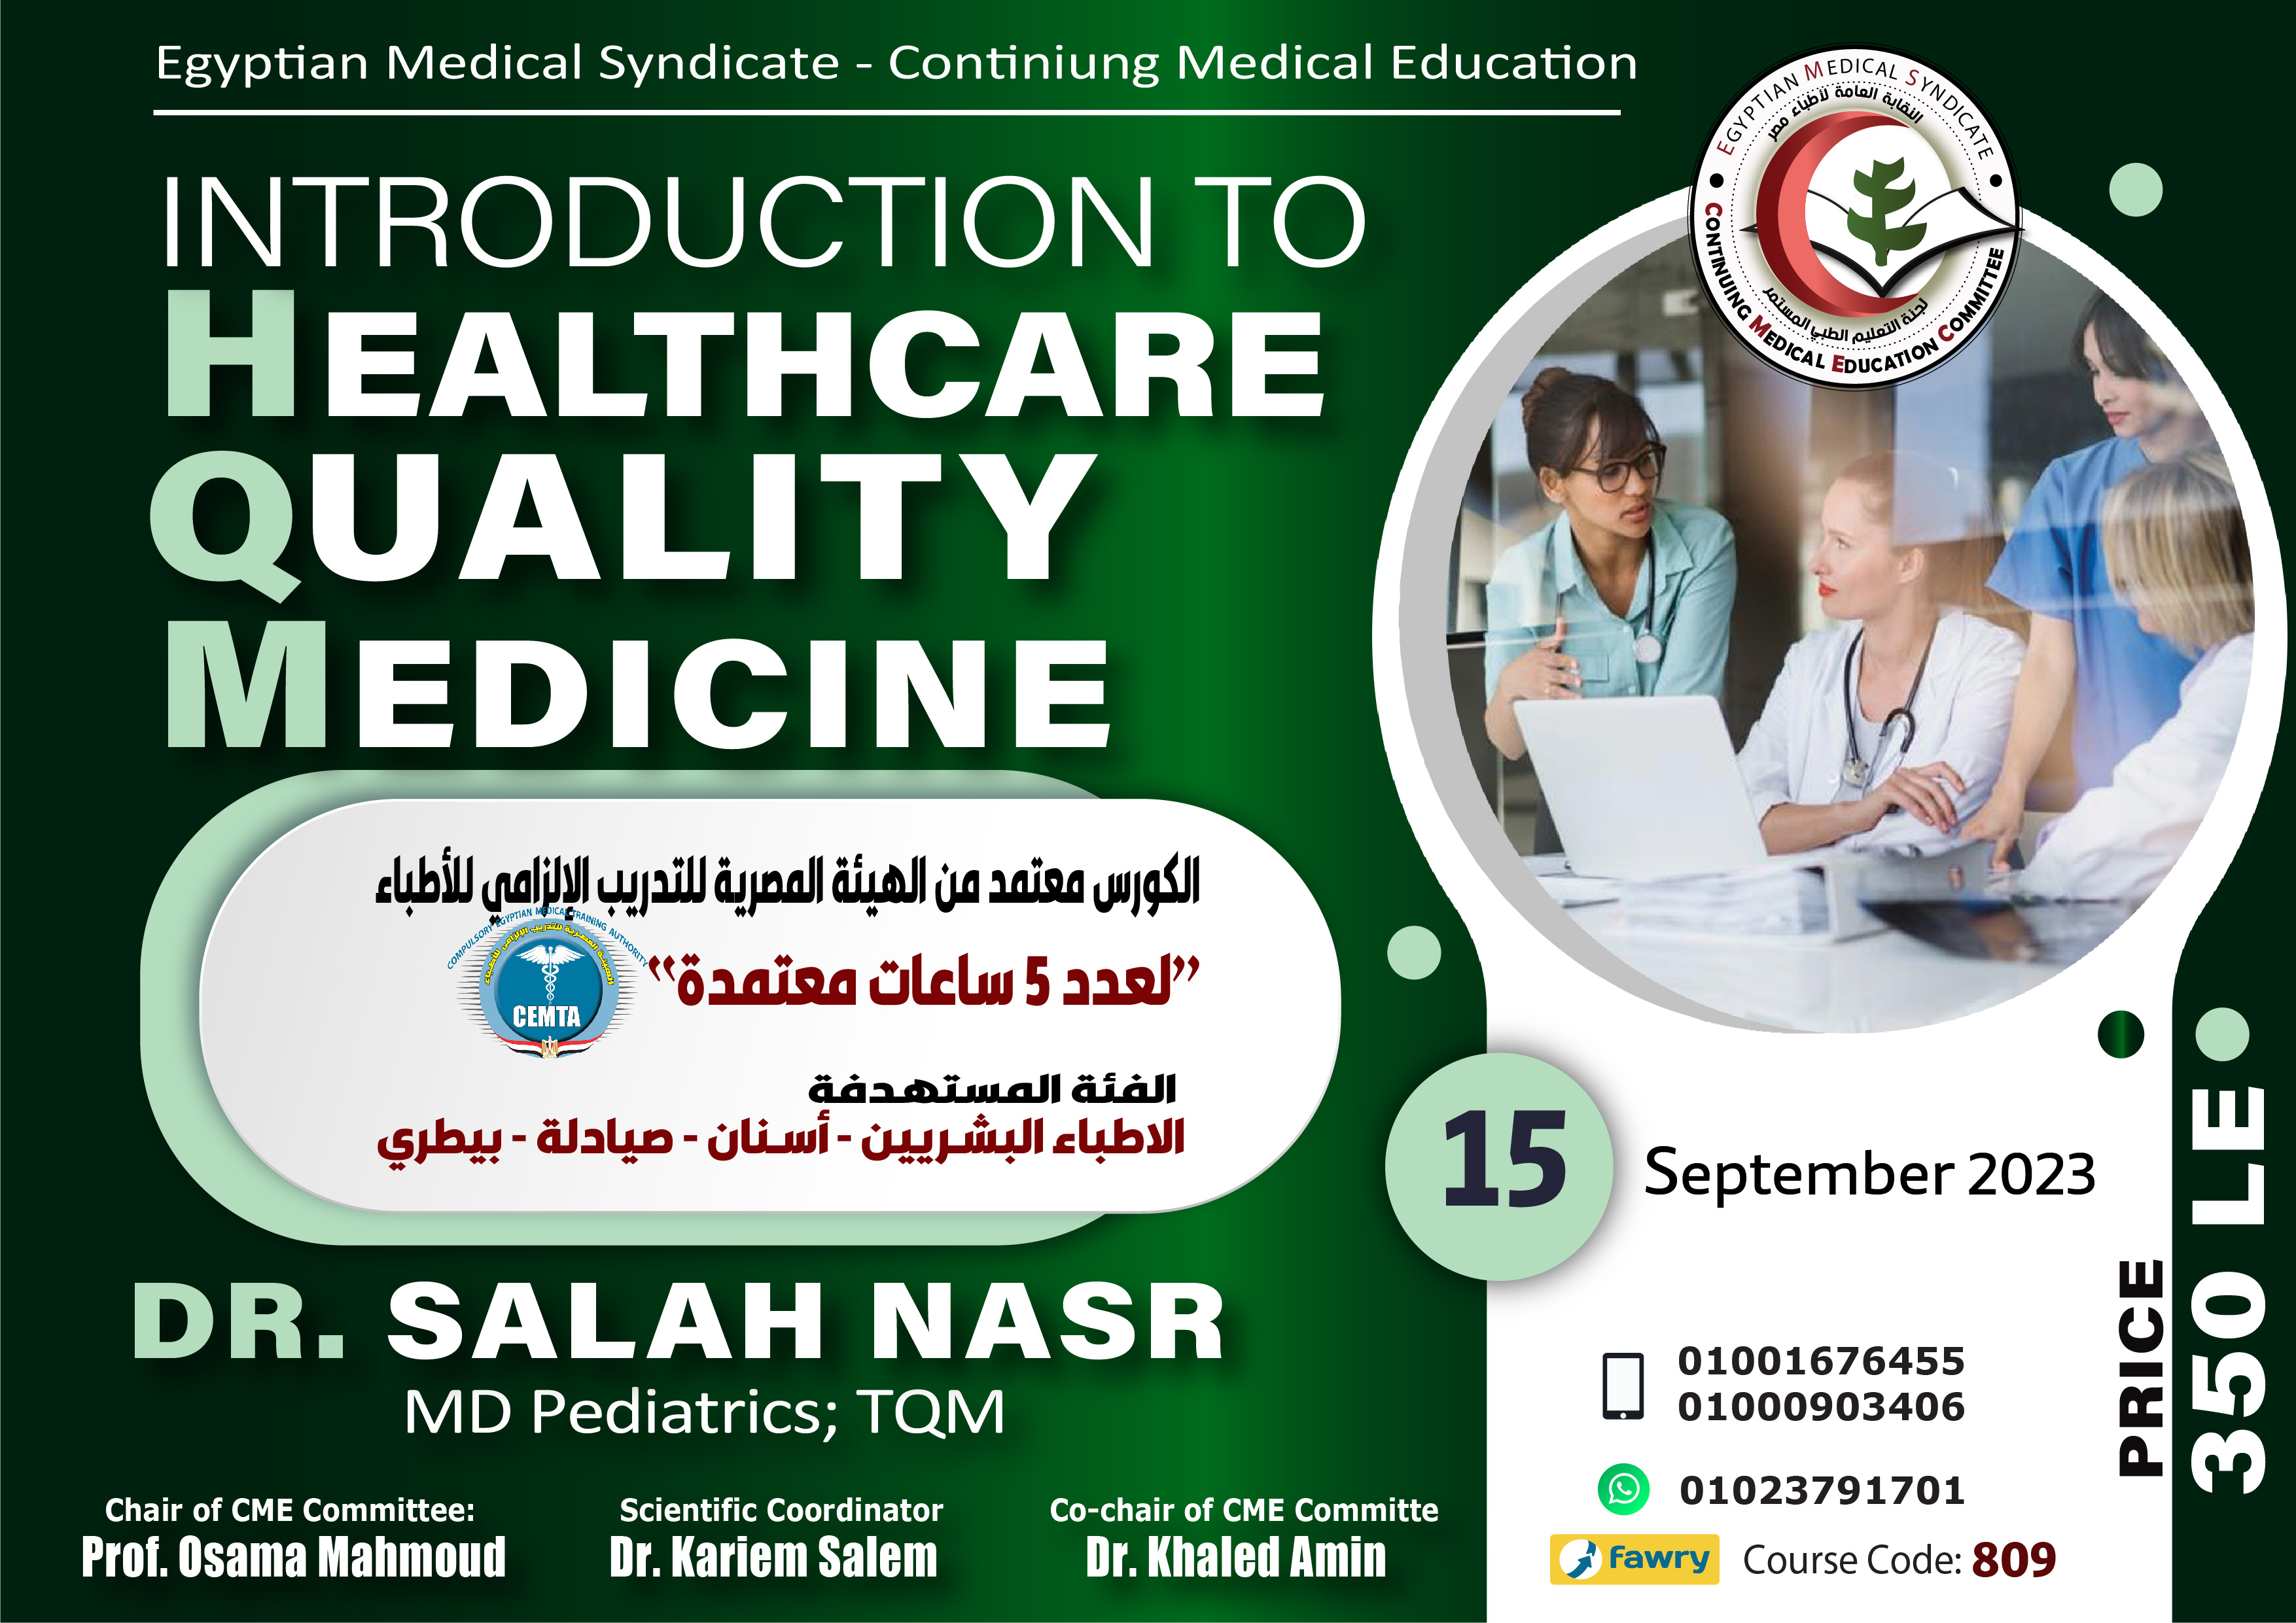 Introduction to Healthcare Quality Medicine